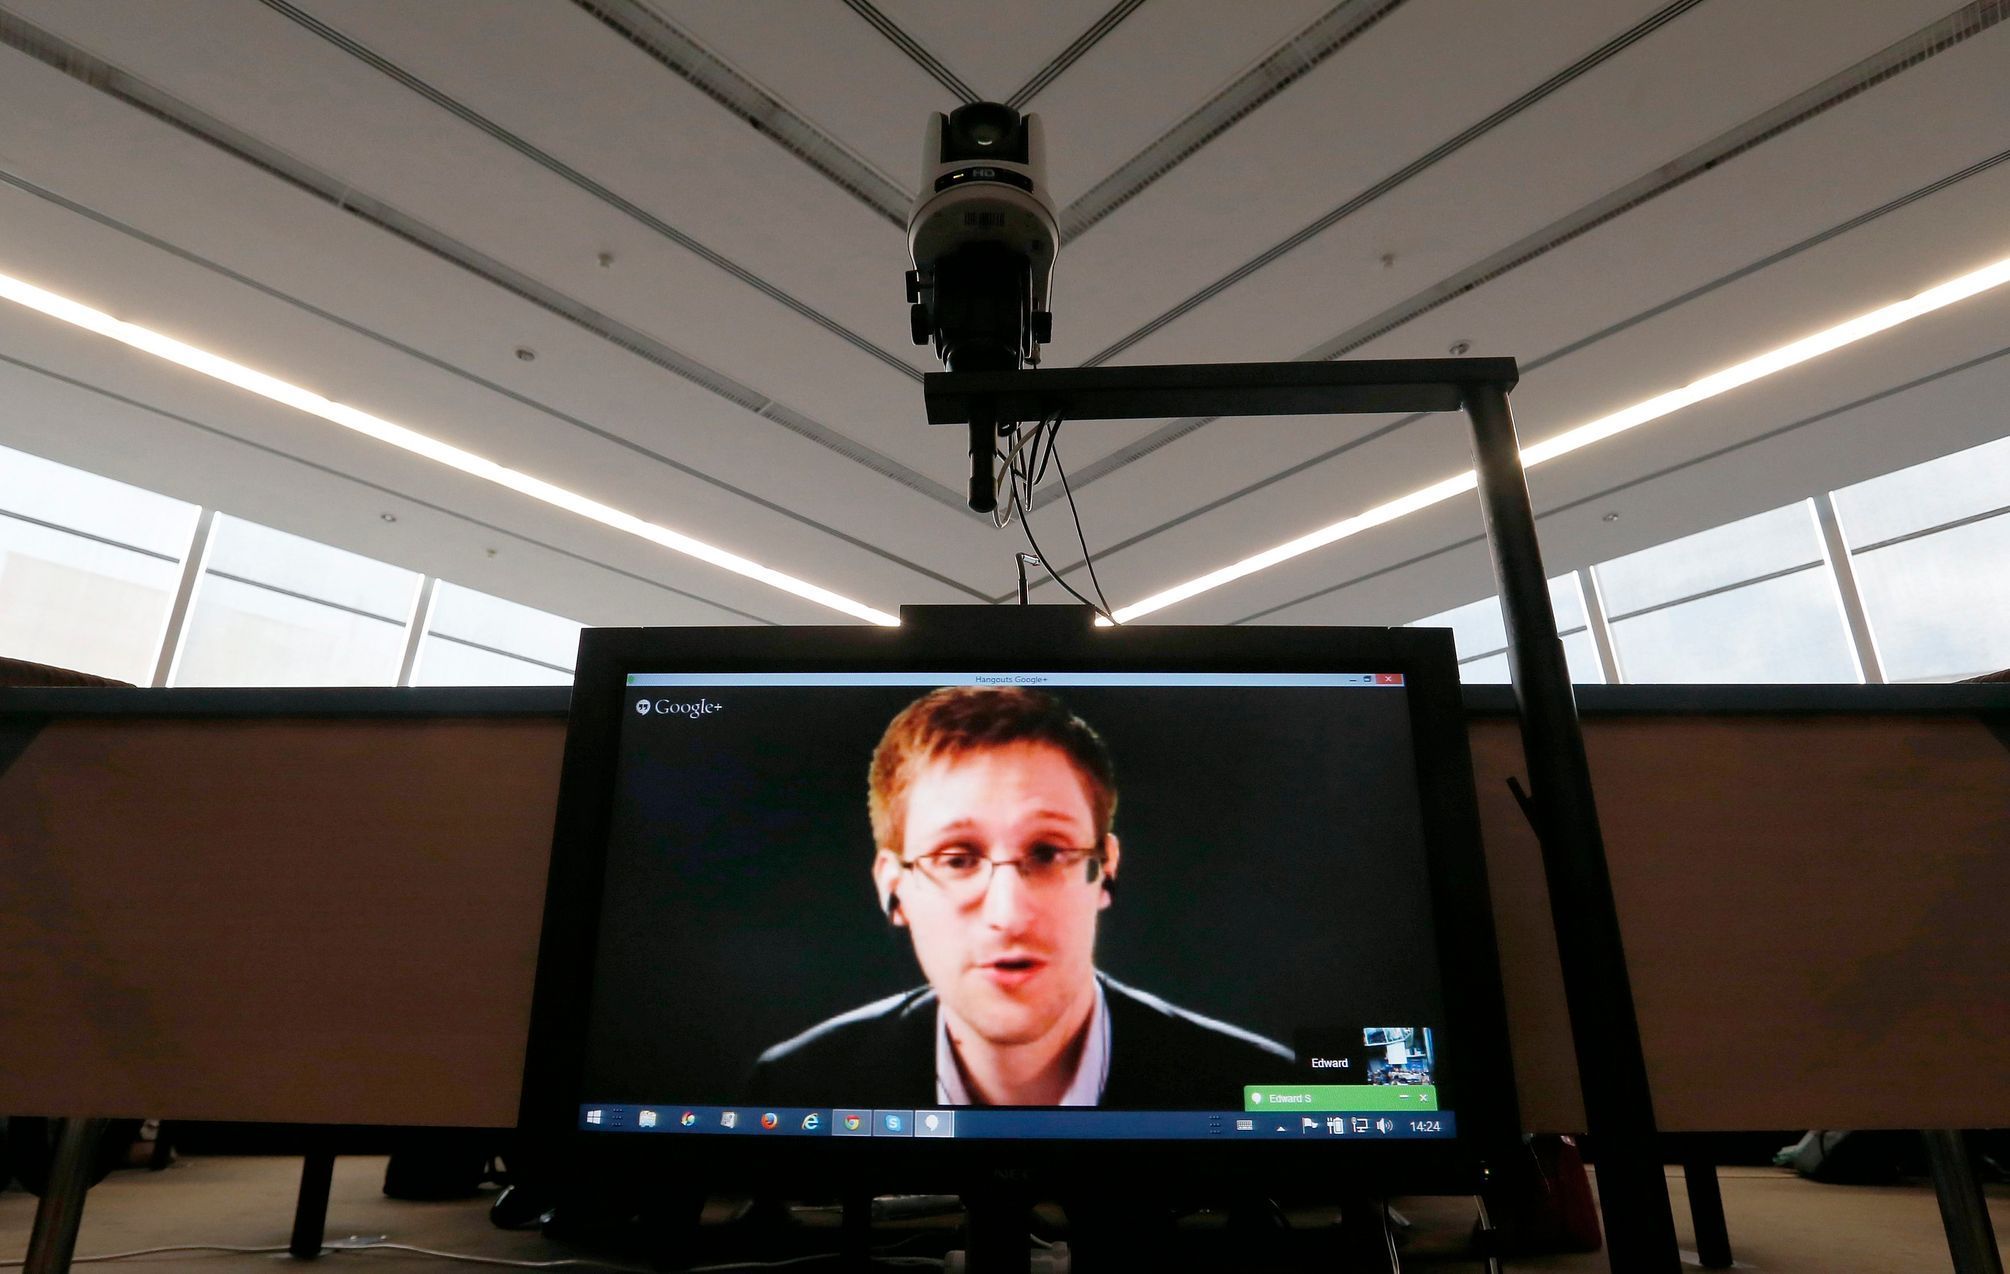 Accused government whistleblower Snowden speaks via video conference in Strasbourg